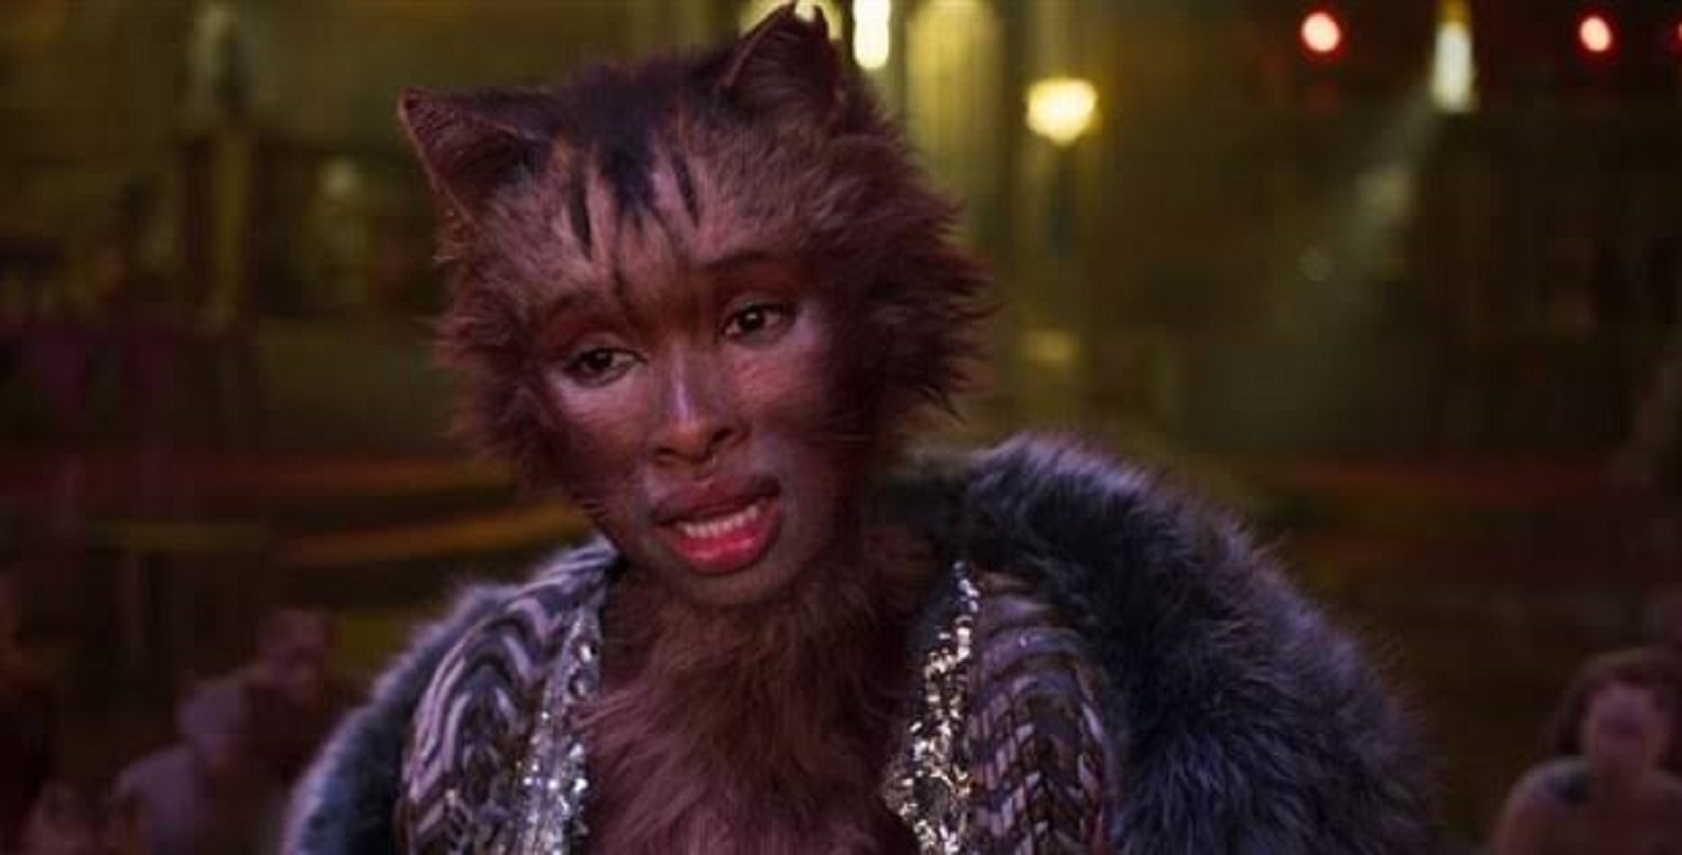 New Song: Listen To Jennifer Hudson’s Version of ‘Memory’ From Cats Movie